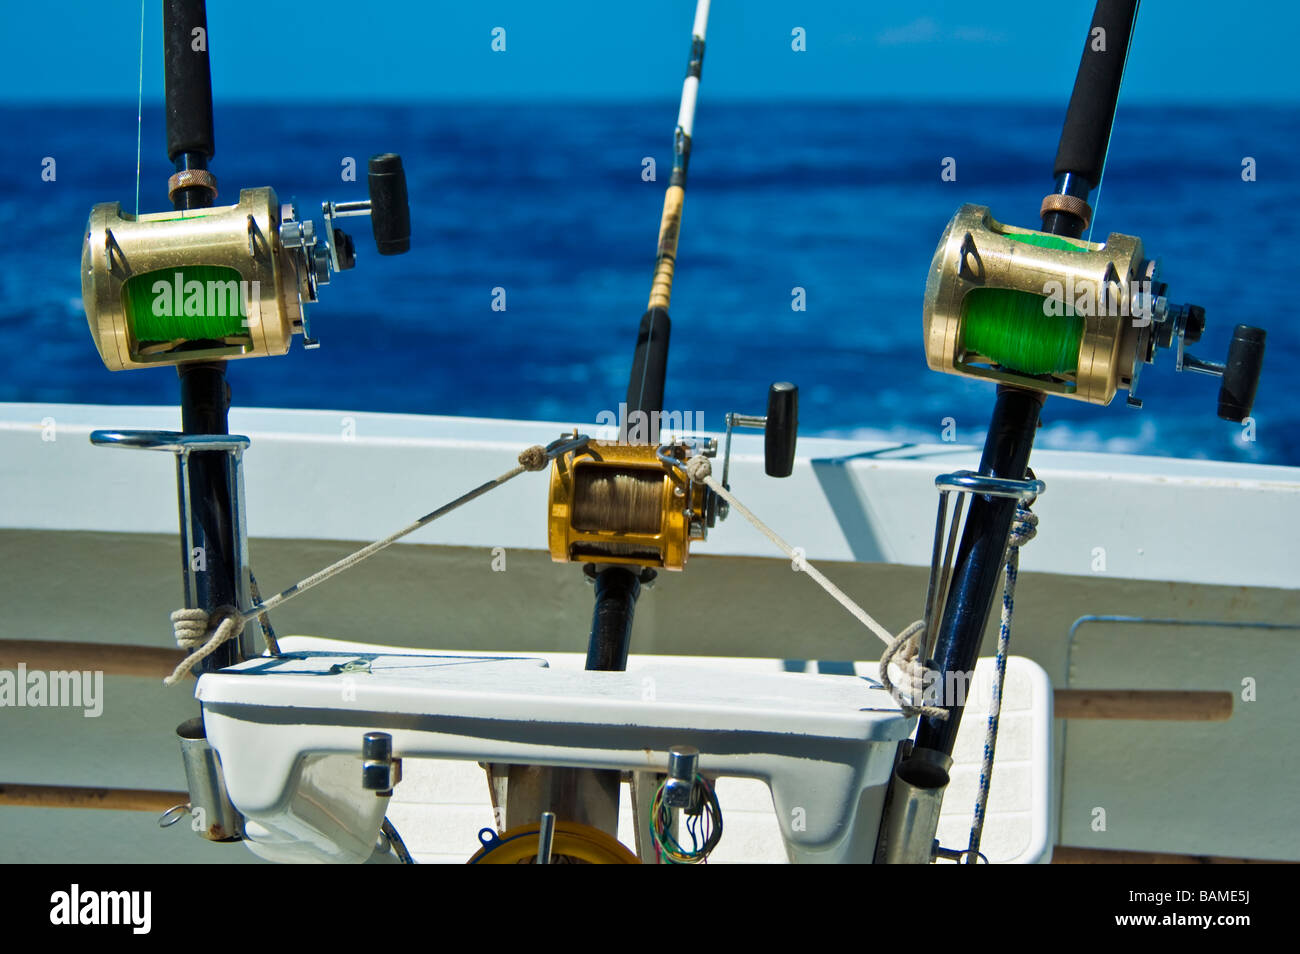 https://c8.alamy.com/comp/BAME5J/big-game-fishing-rods-with-reels-on-fishing-boat-mauritius-hochsee-BAME5J.jpg